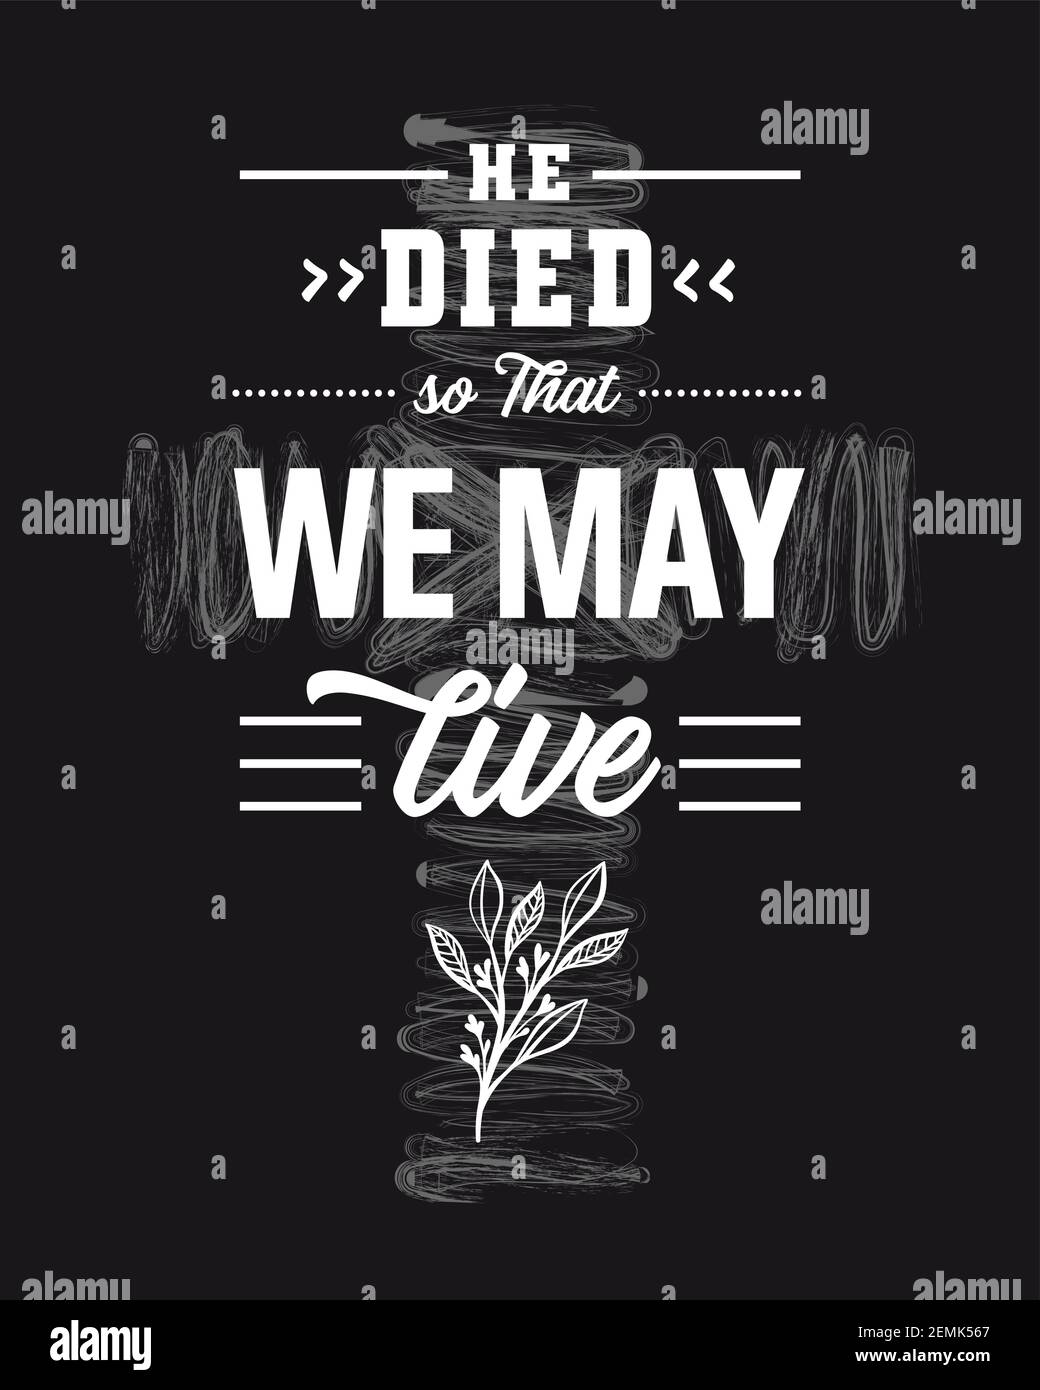 He Died, so That We May Live - christian print. Easter Sunday invitation for service holy week with black typography on white background. Cross and bi Stock Vector